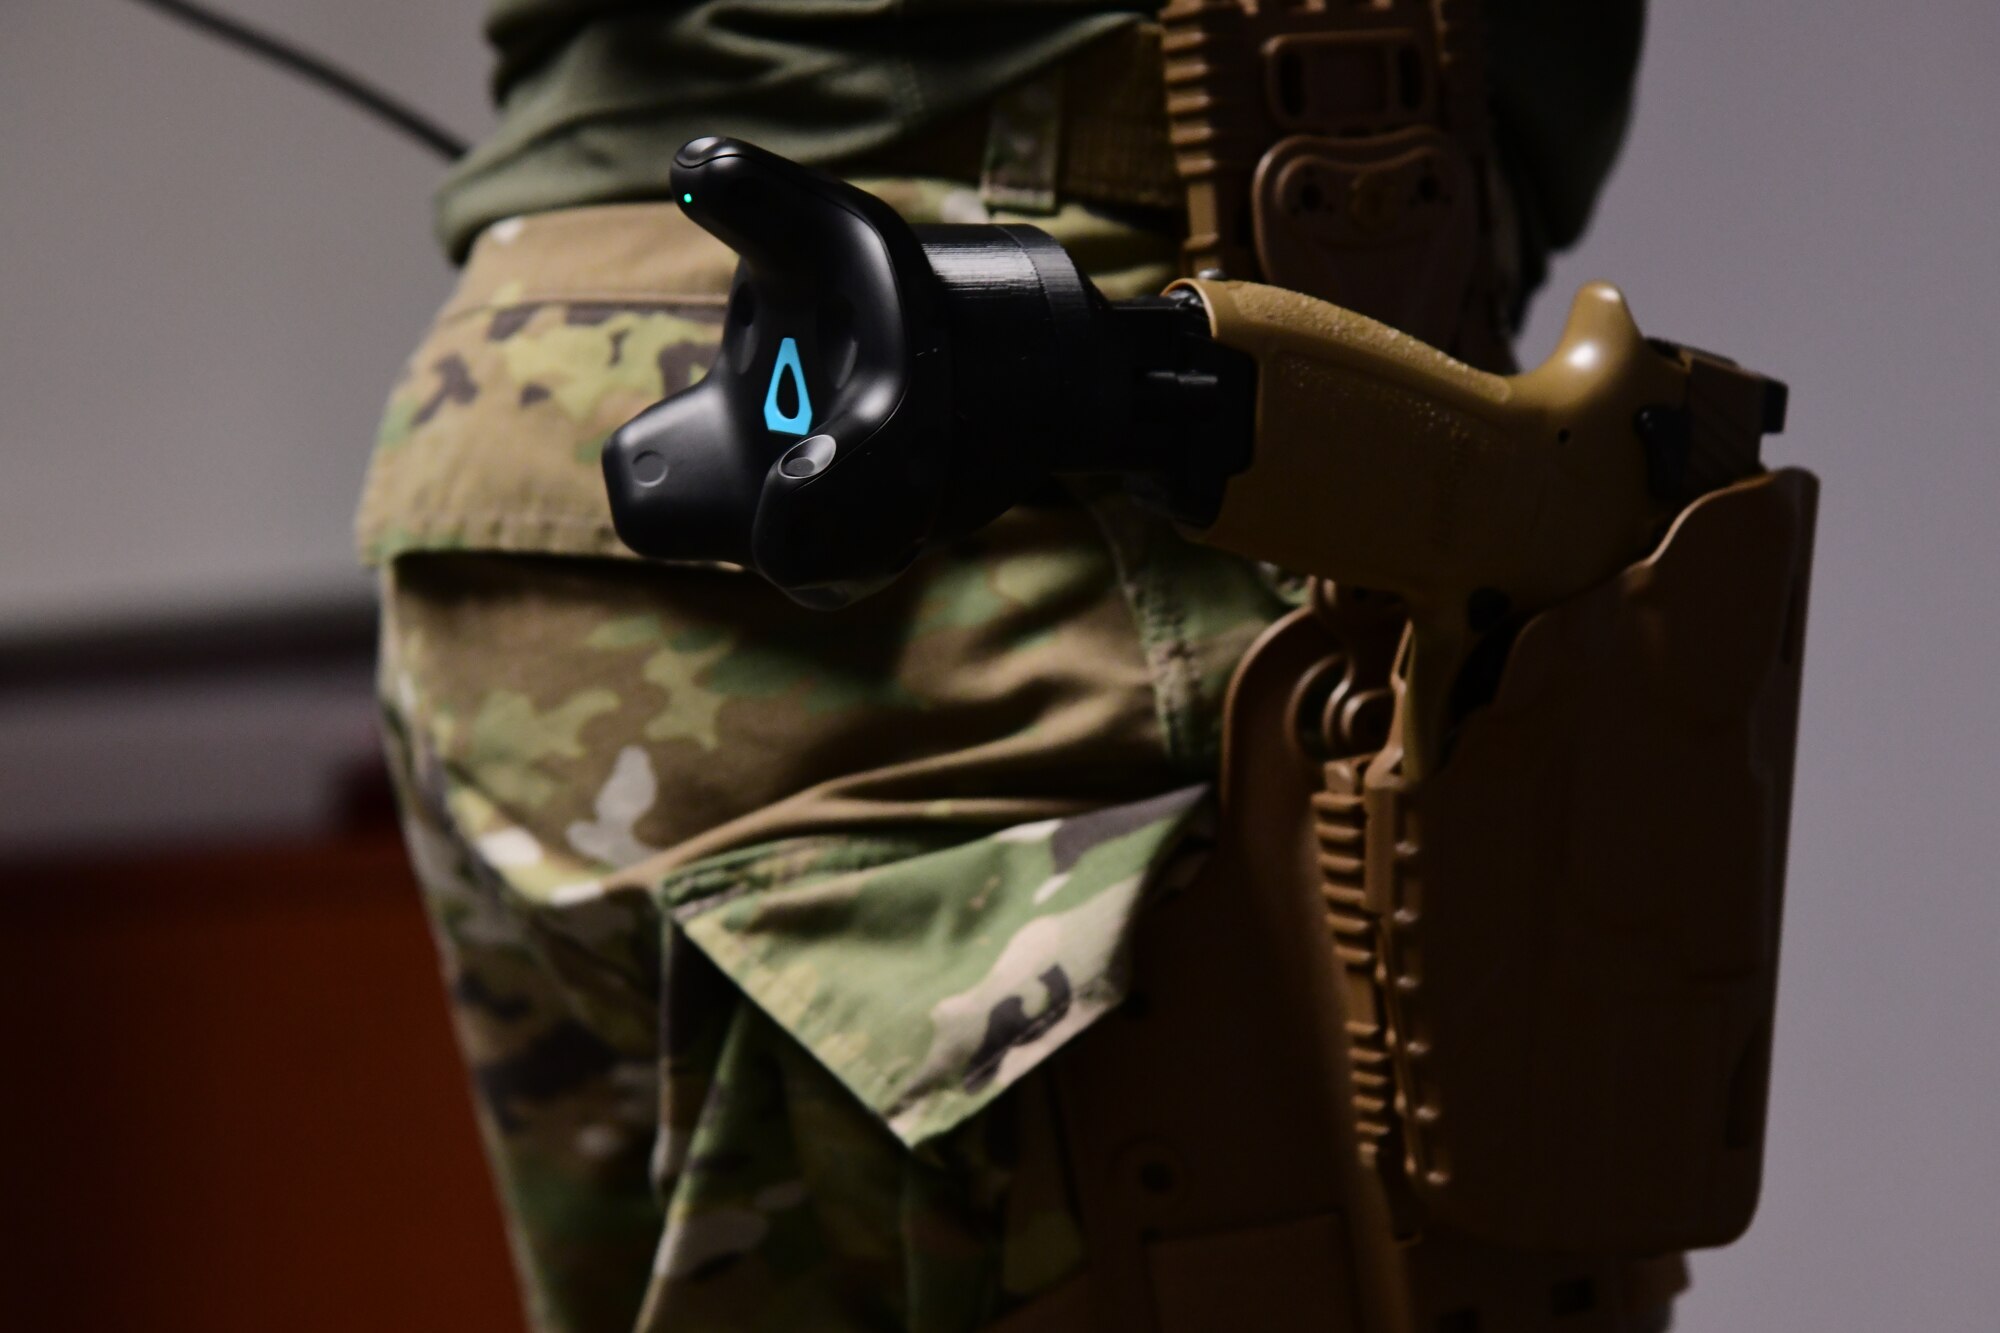 Staff Sgt. David Greenwood, 926th Security Forces Squadron training instructor, uses virtual reality to run through Use of Force training scenarios during the Mandatory Unit Training Assembly, Oct. 4, at Nellis Air Force Base, Nevada. (U.S. Air Force Photo by Senior Airman Brett Clashman)